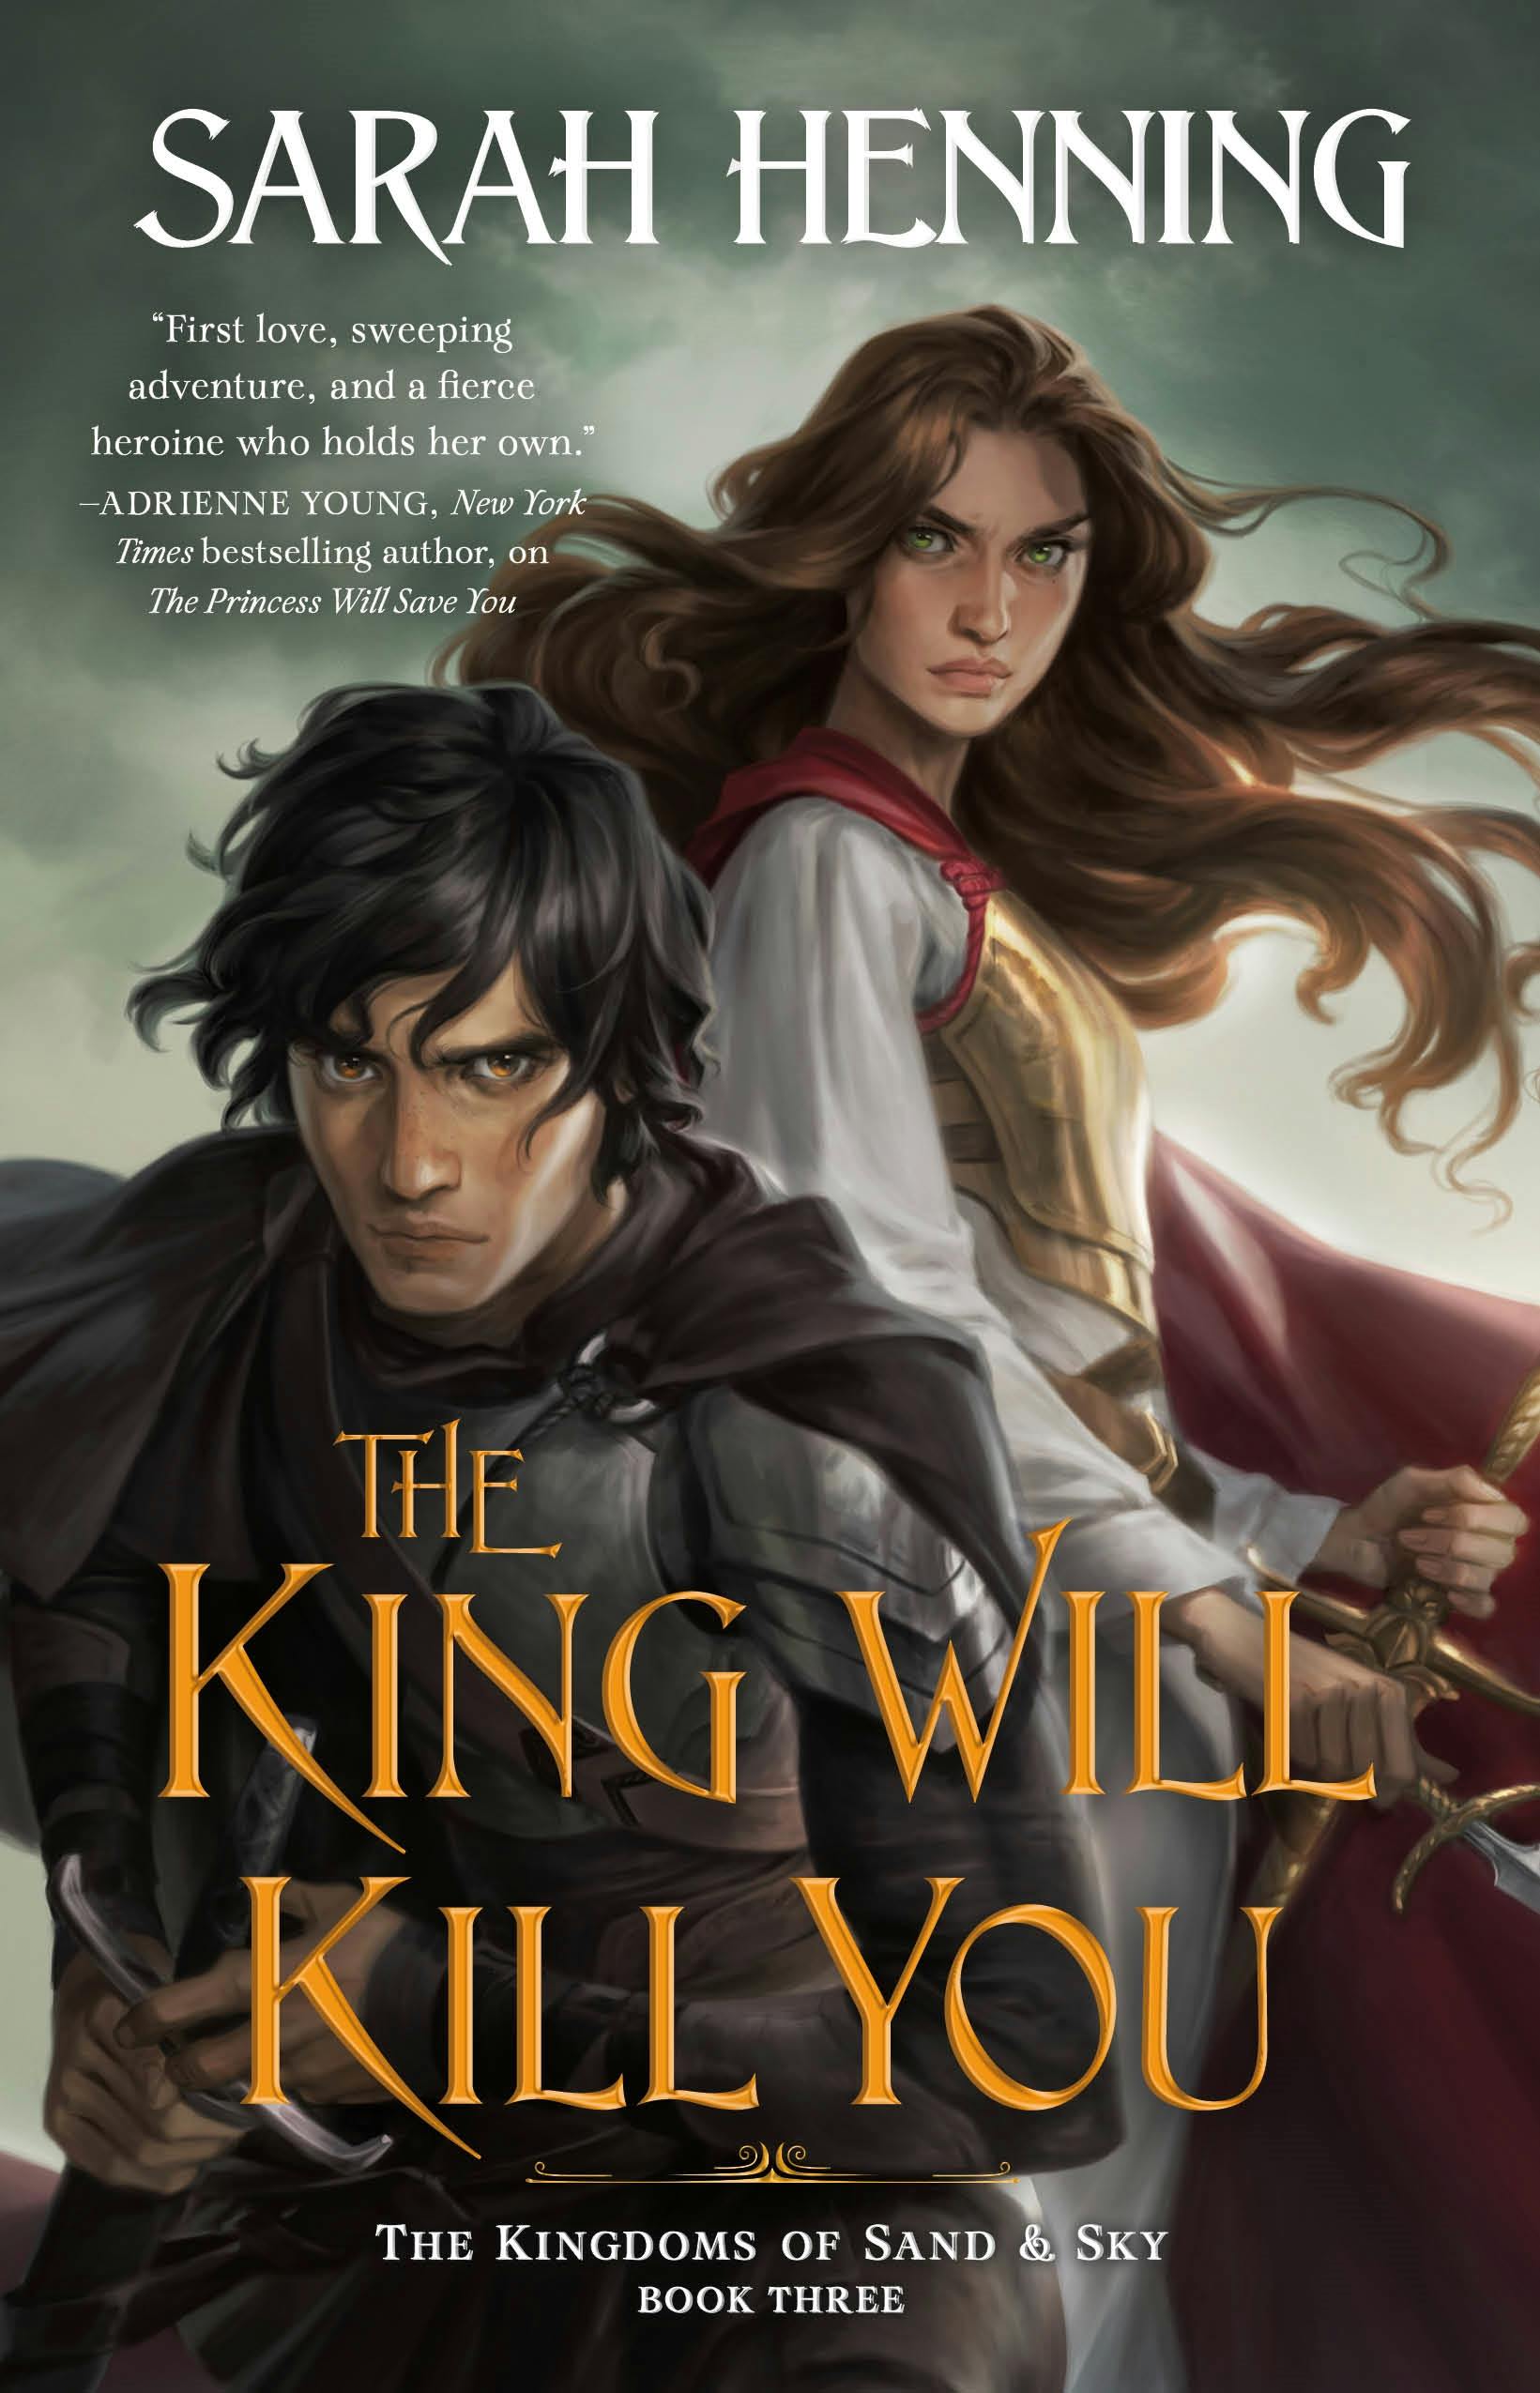 Cover for the book titled as: The King Will Kill You